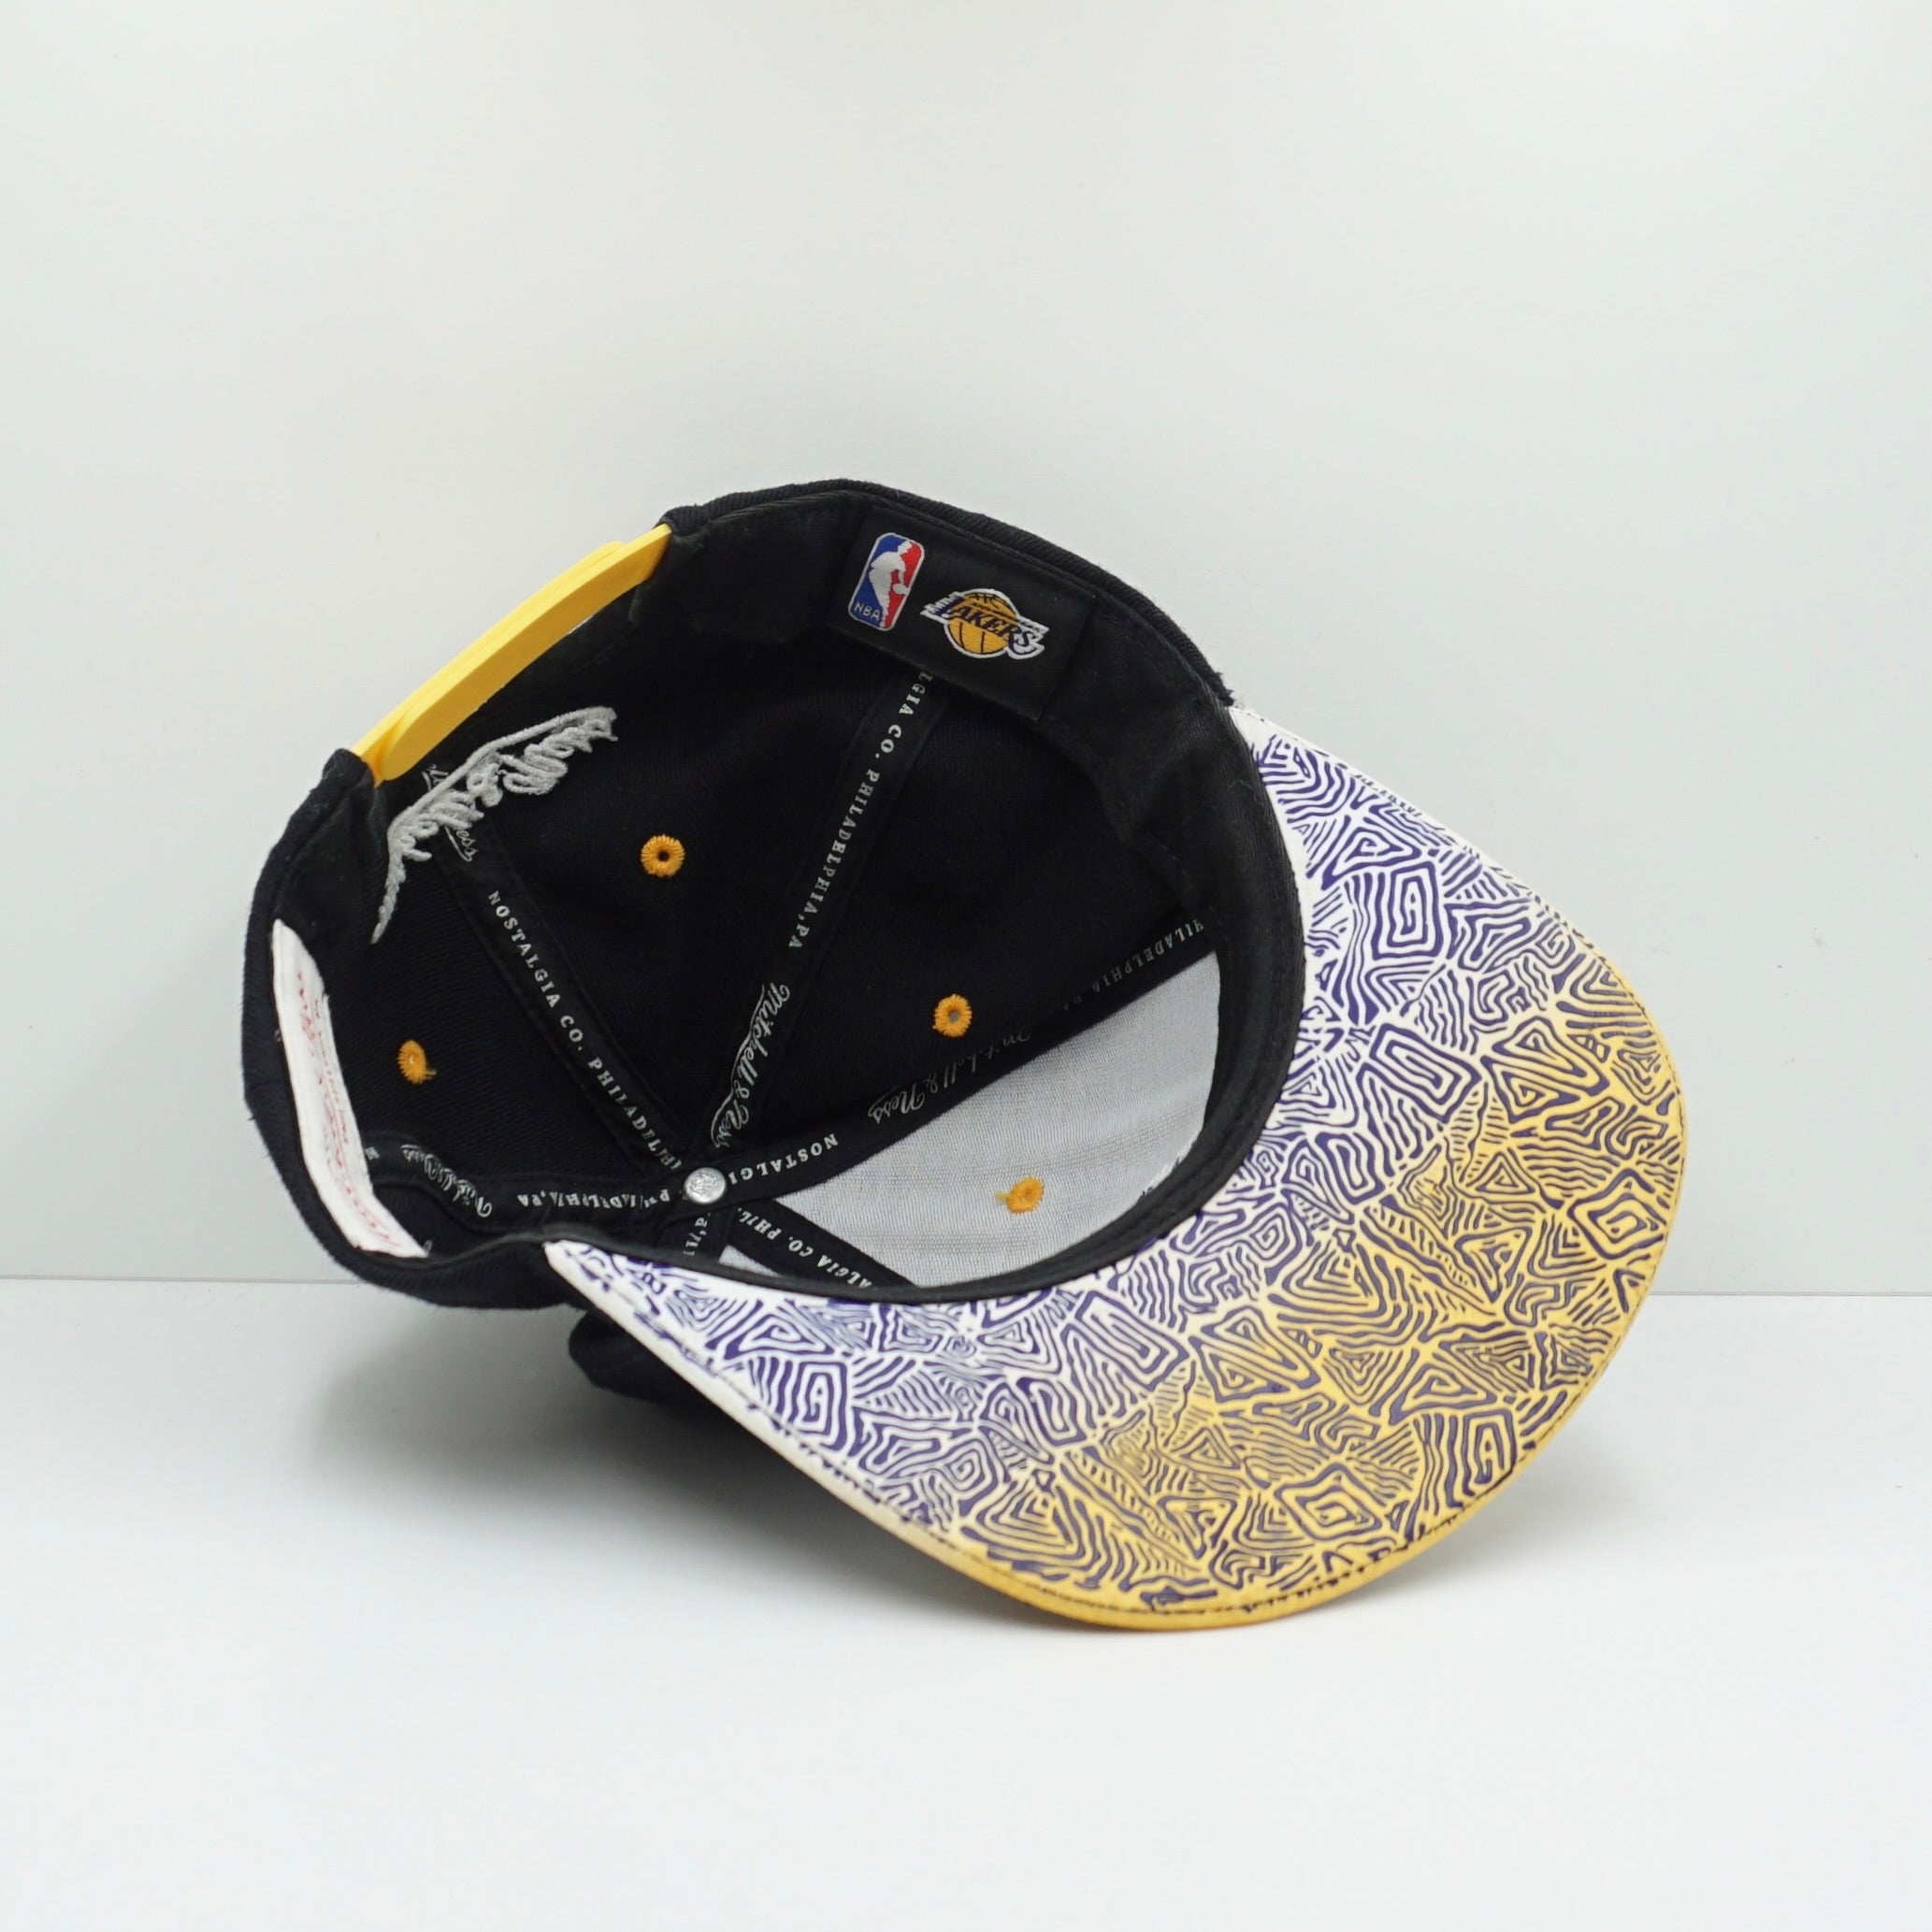 Mitchell & Ness Los Angeles Lakers Special Brim Snapback